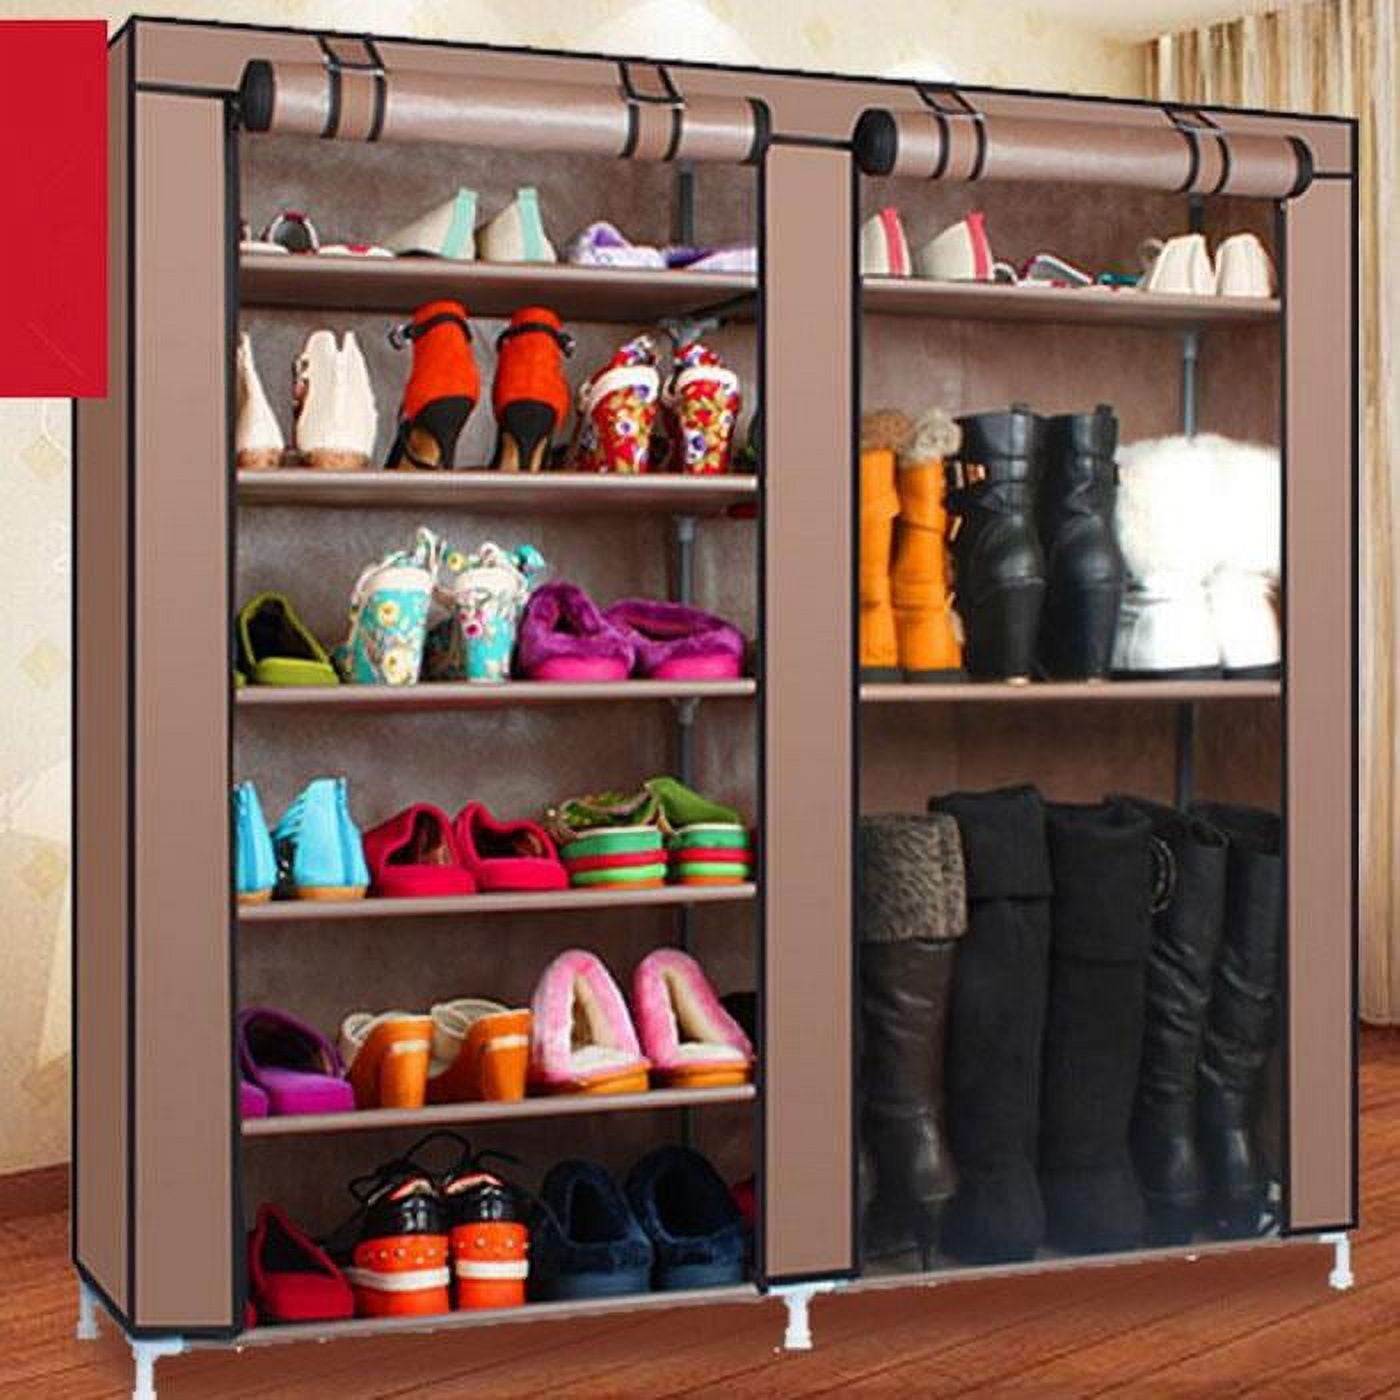 Goplus White Wood Shoe Rack Organizer with 6 Tiers - Holds 9 Pairs of Shoes  - Freestanding and Stackable in the Shoe Storage department at